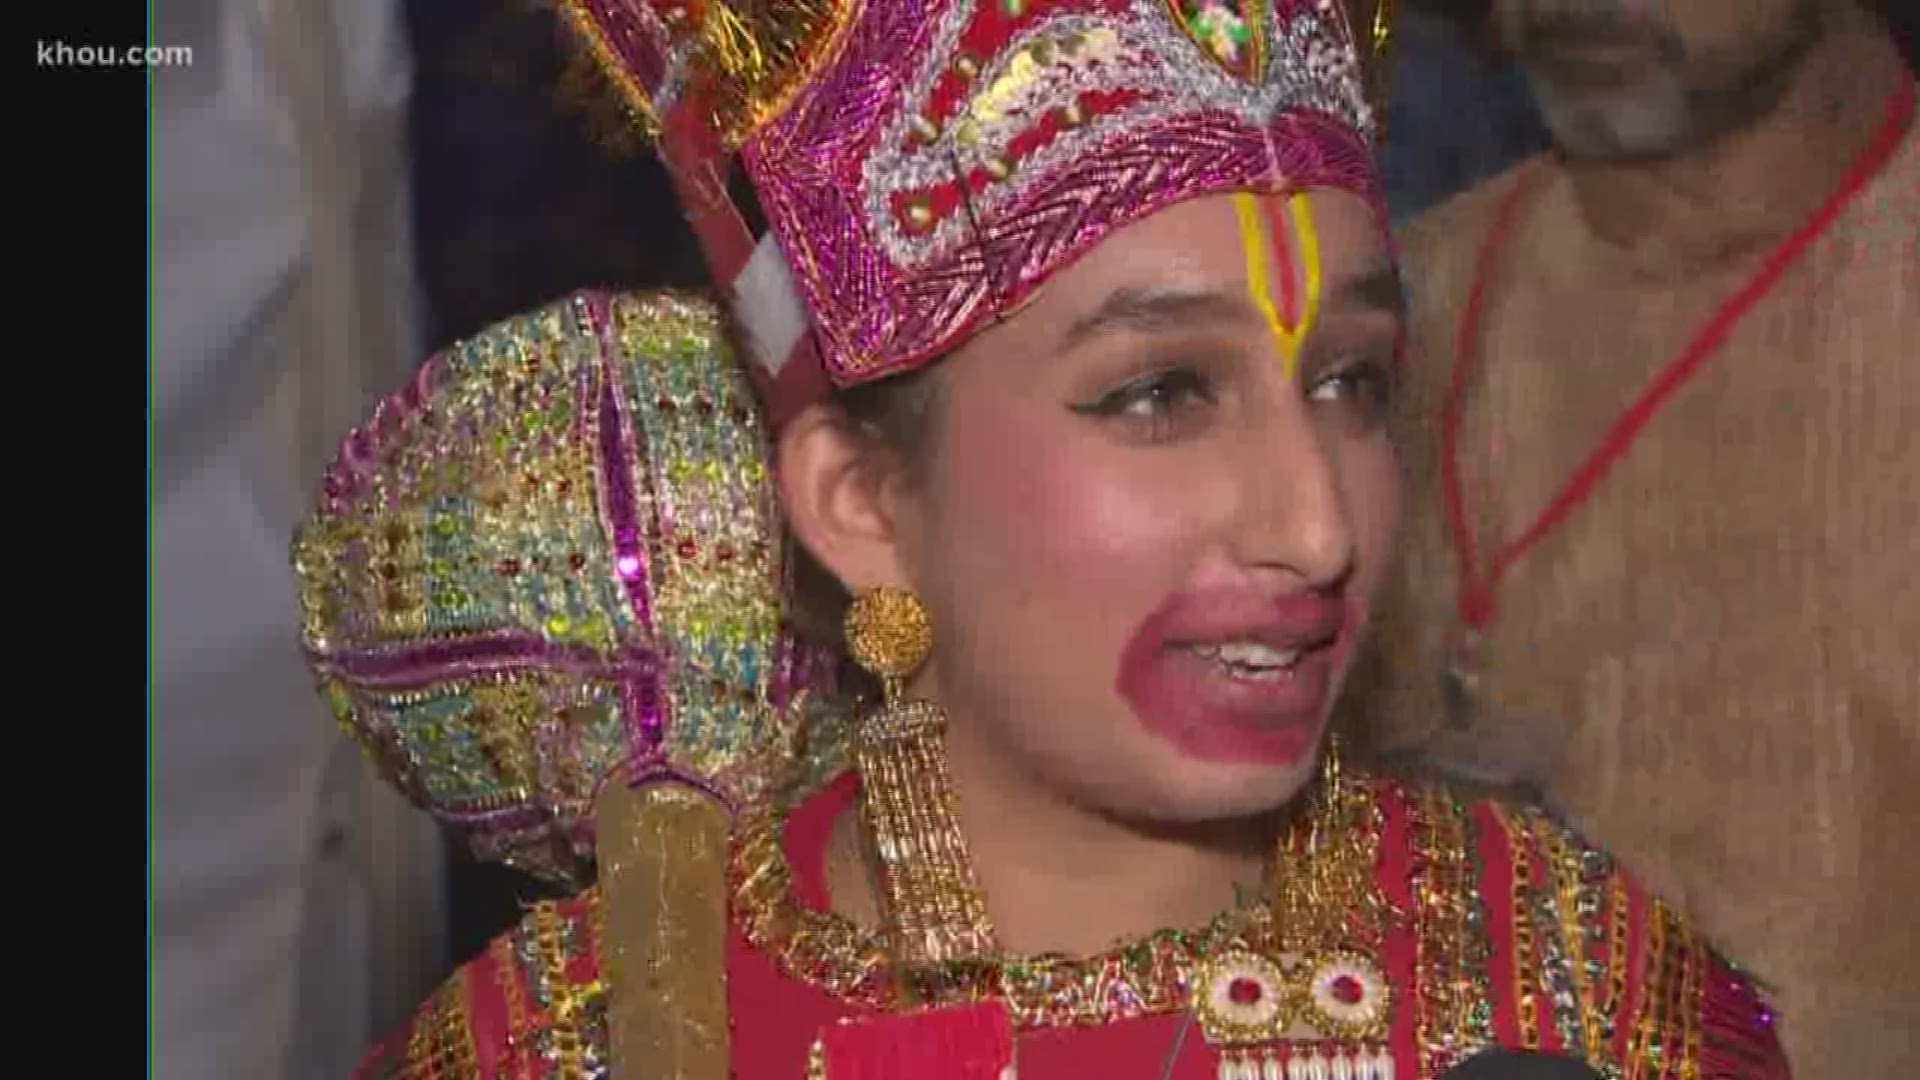 In India, the celebration goes on for 30 days. But in Sugar Land, it's for one night only.